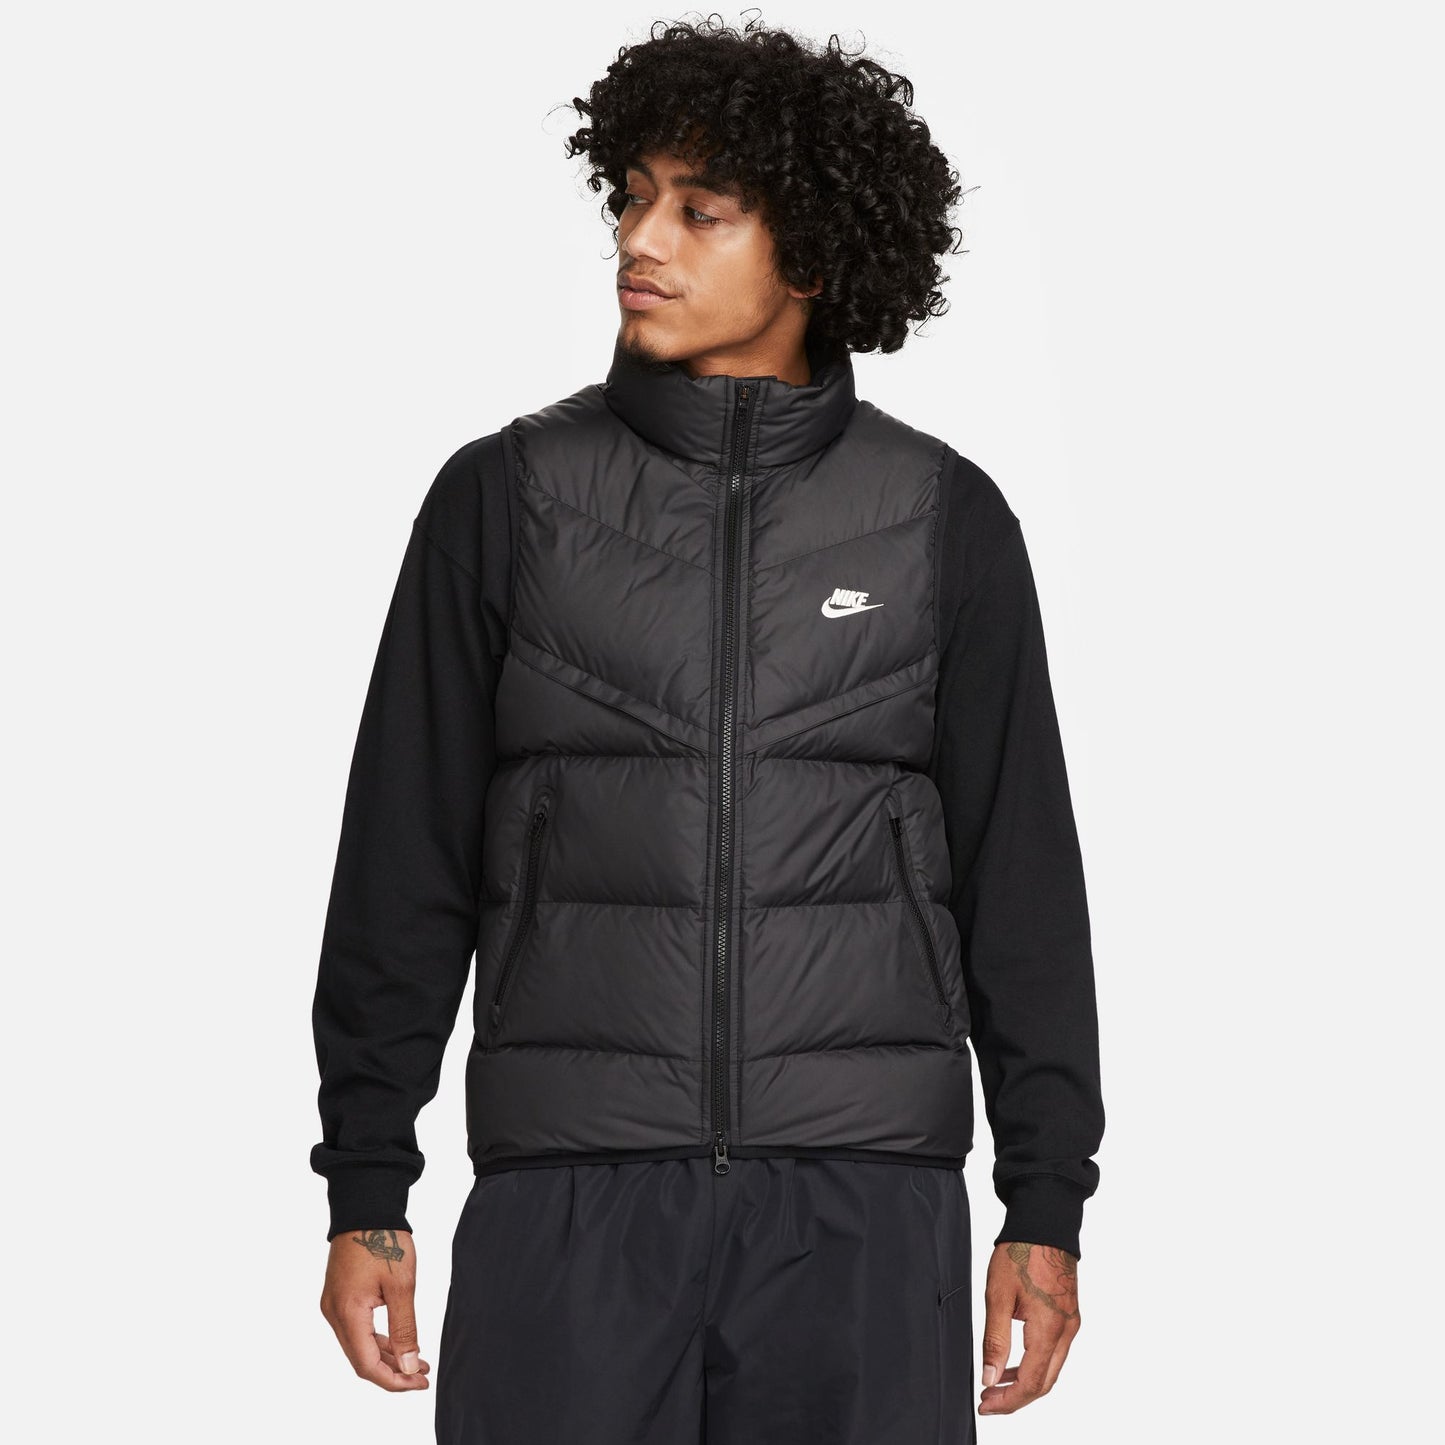 Nike Storm-FIT Windrunner Men's Insulated Gilet – Laced.